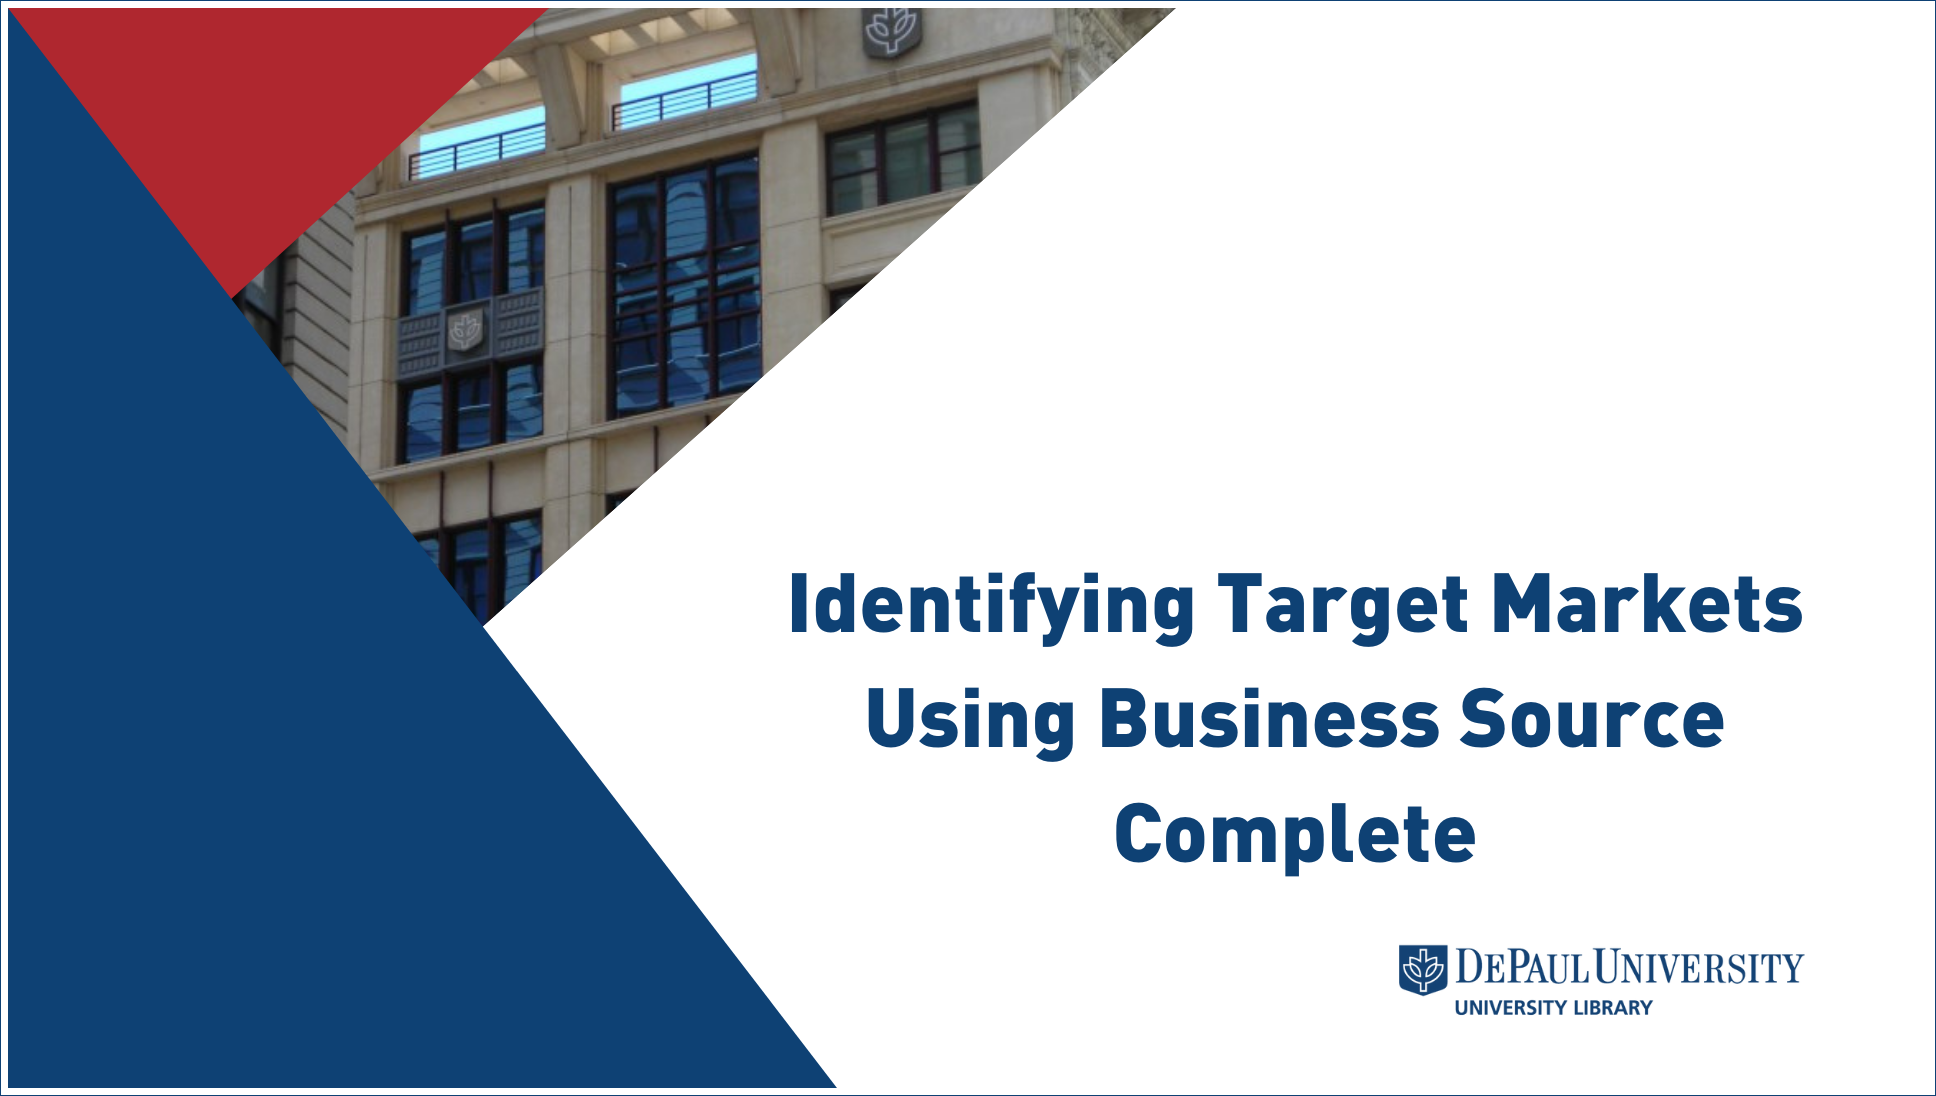 Identifying Target Markets Using Business Source Complete